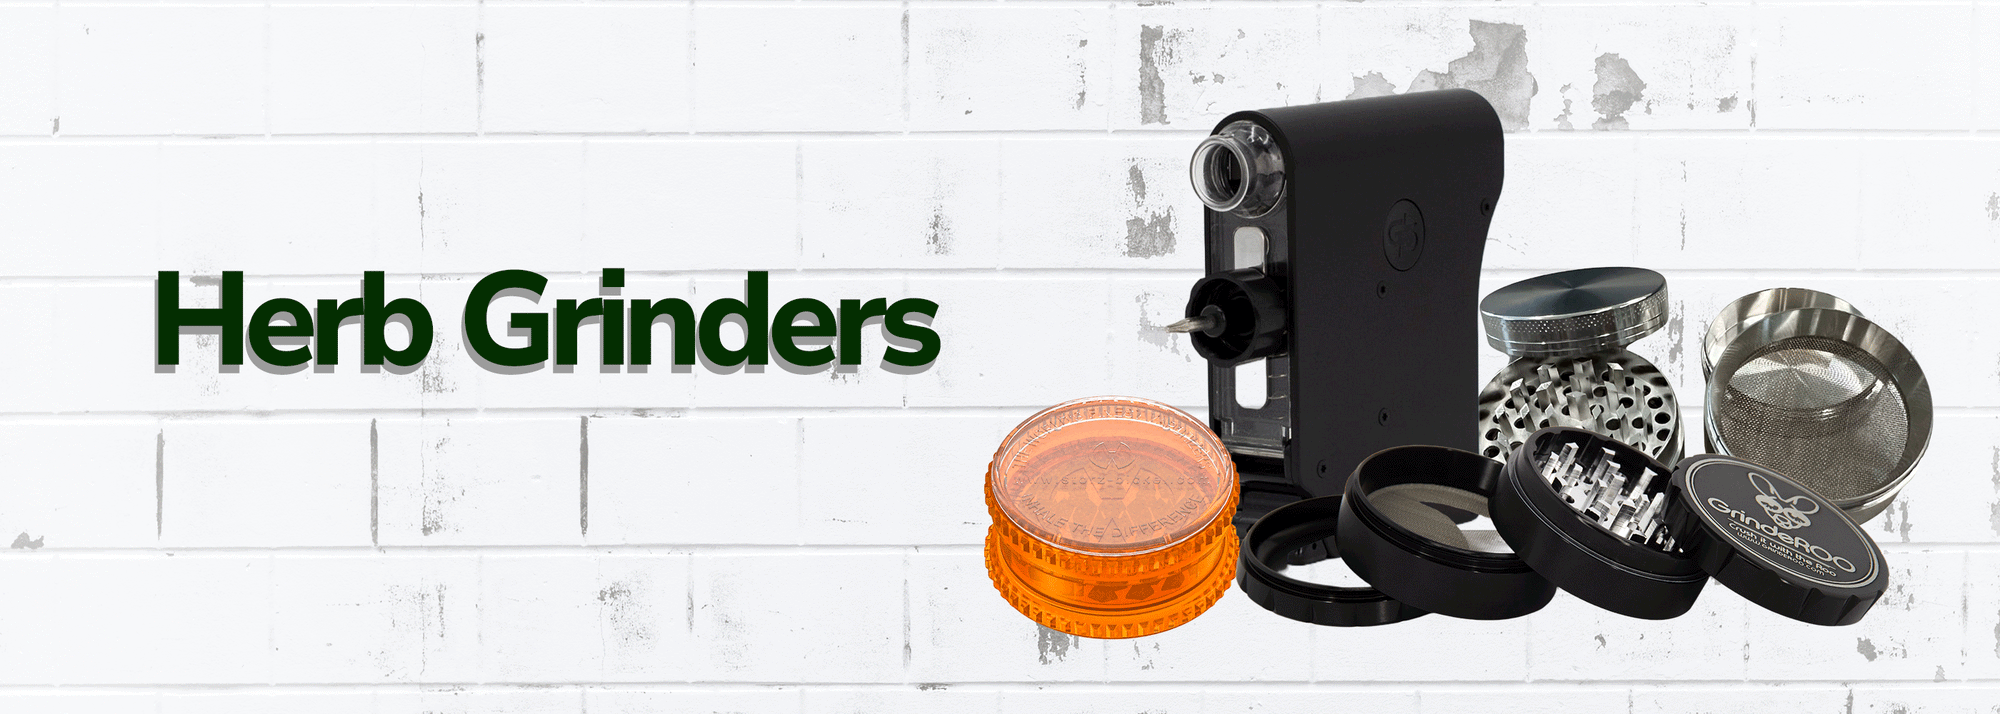 Buy Herb Grinders - Wick and Wire Co Melbourne Vape Shop, Victoria Australia